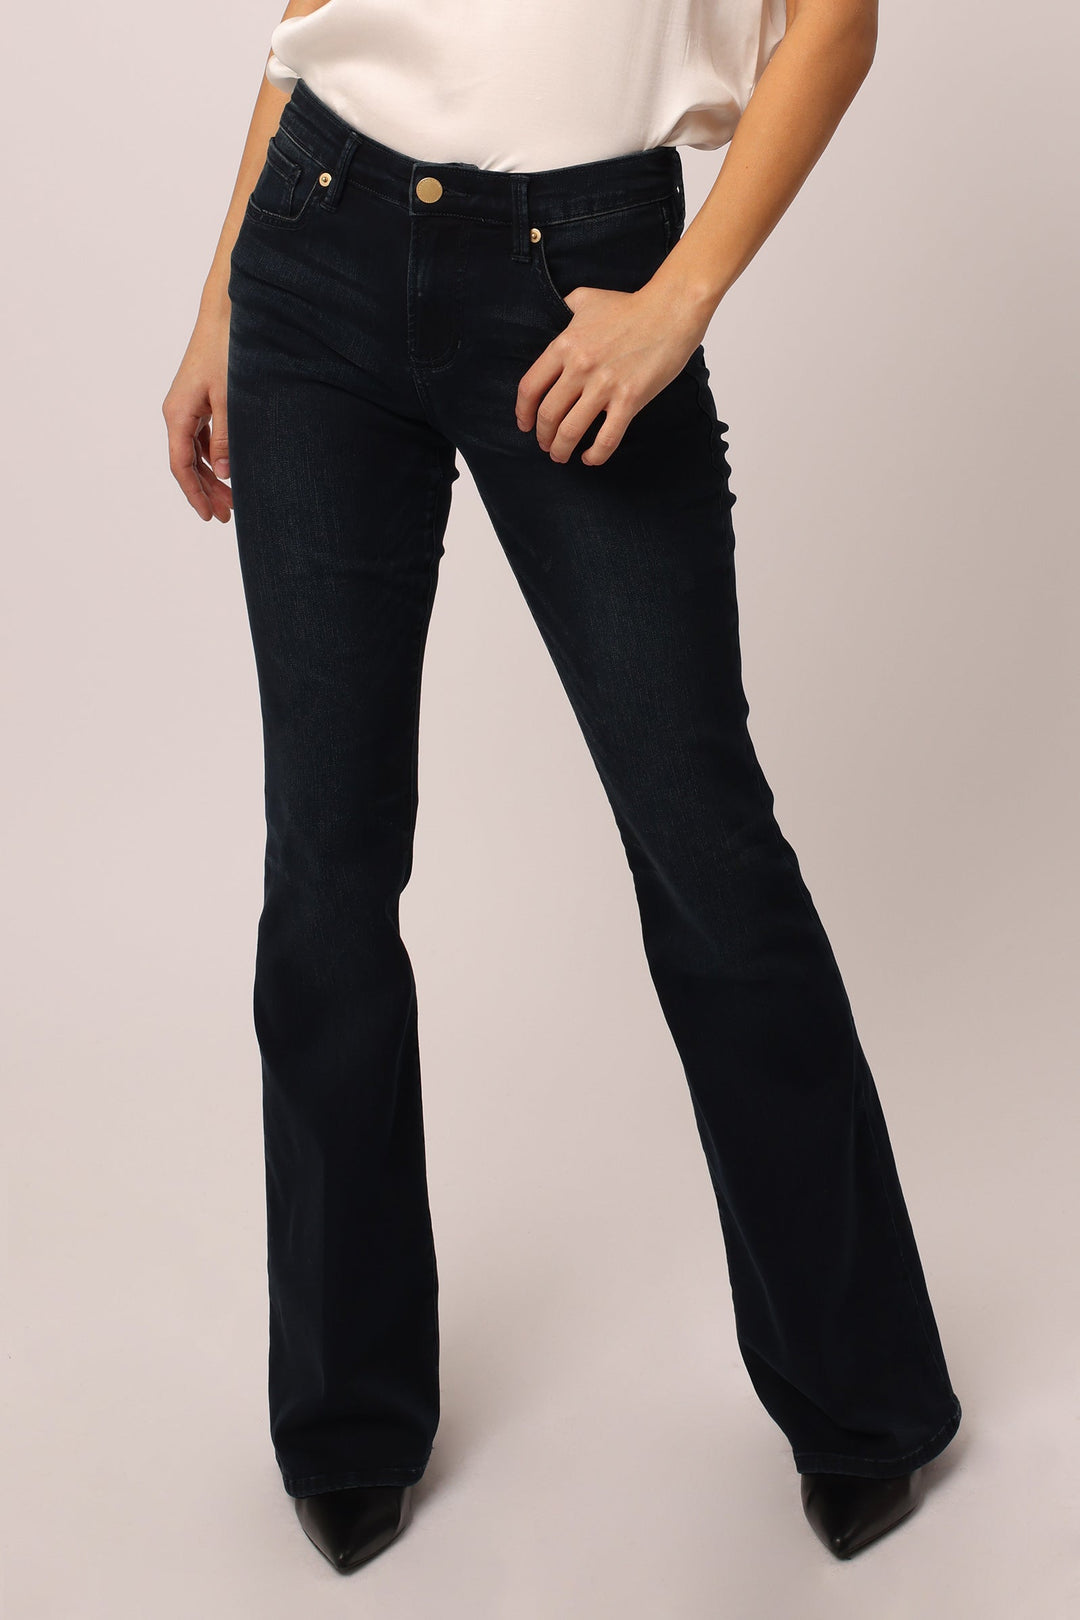 Women's High-Waisted Flare Jeans & Bootcut Jeans